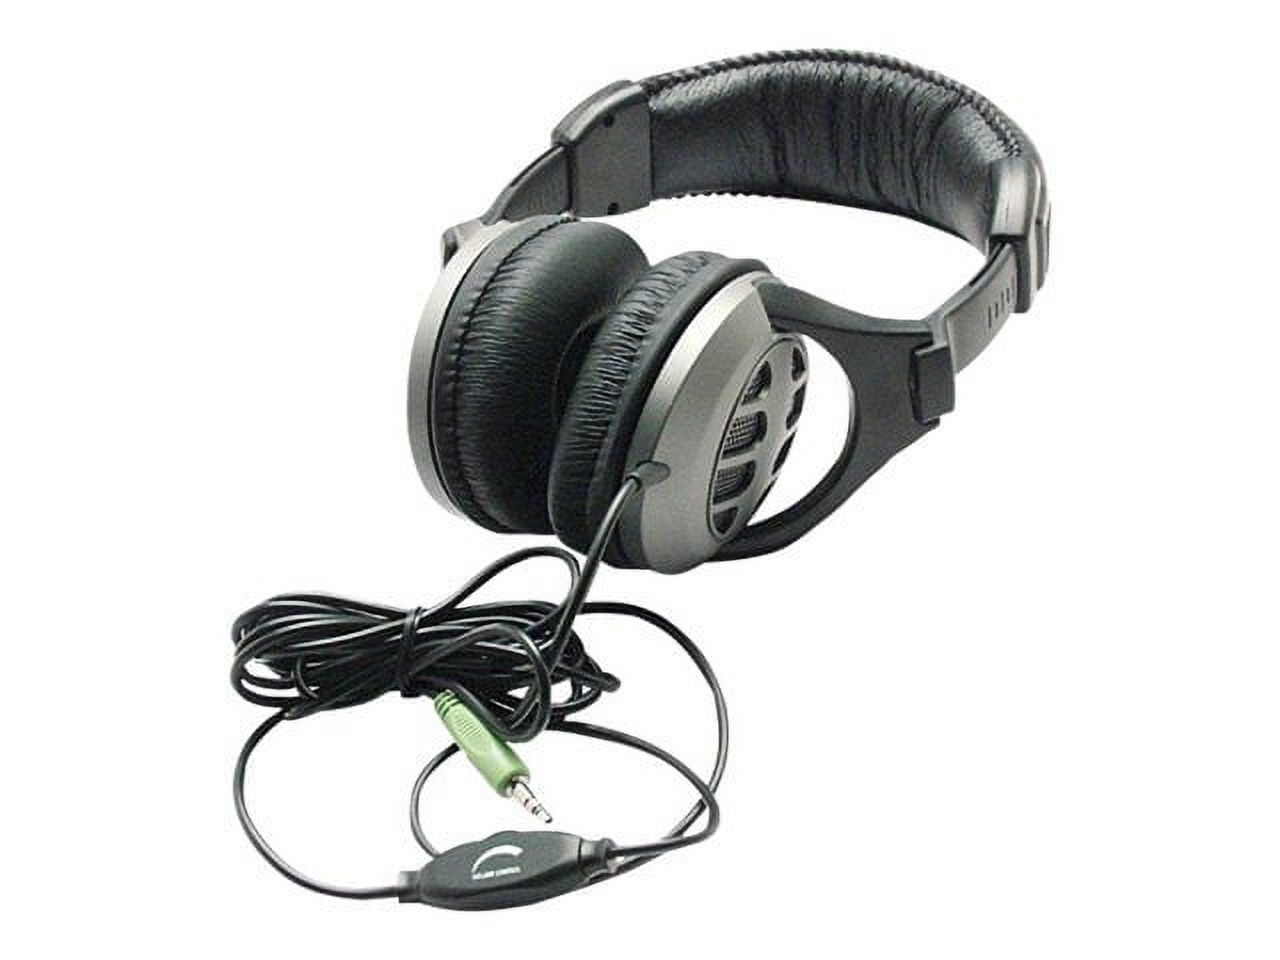 INLAND PRODUCTS INC. - HEADPHONE W/VOLUME CONTROL - image 4 of 5